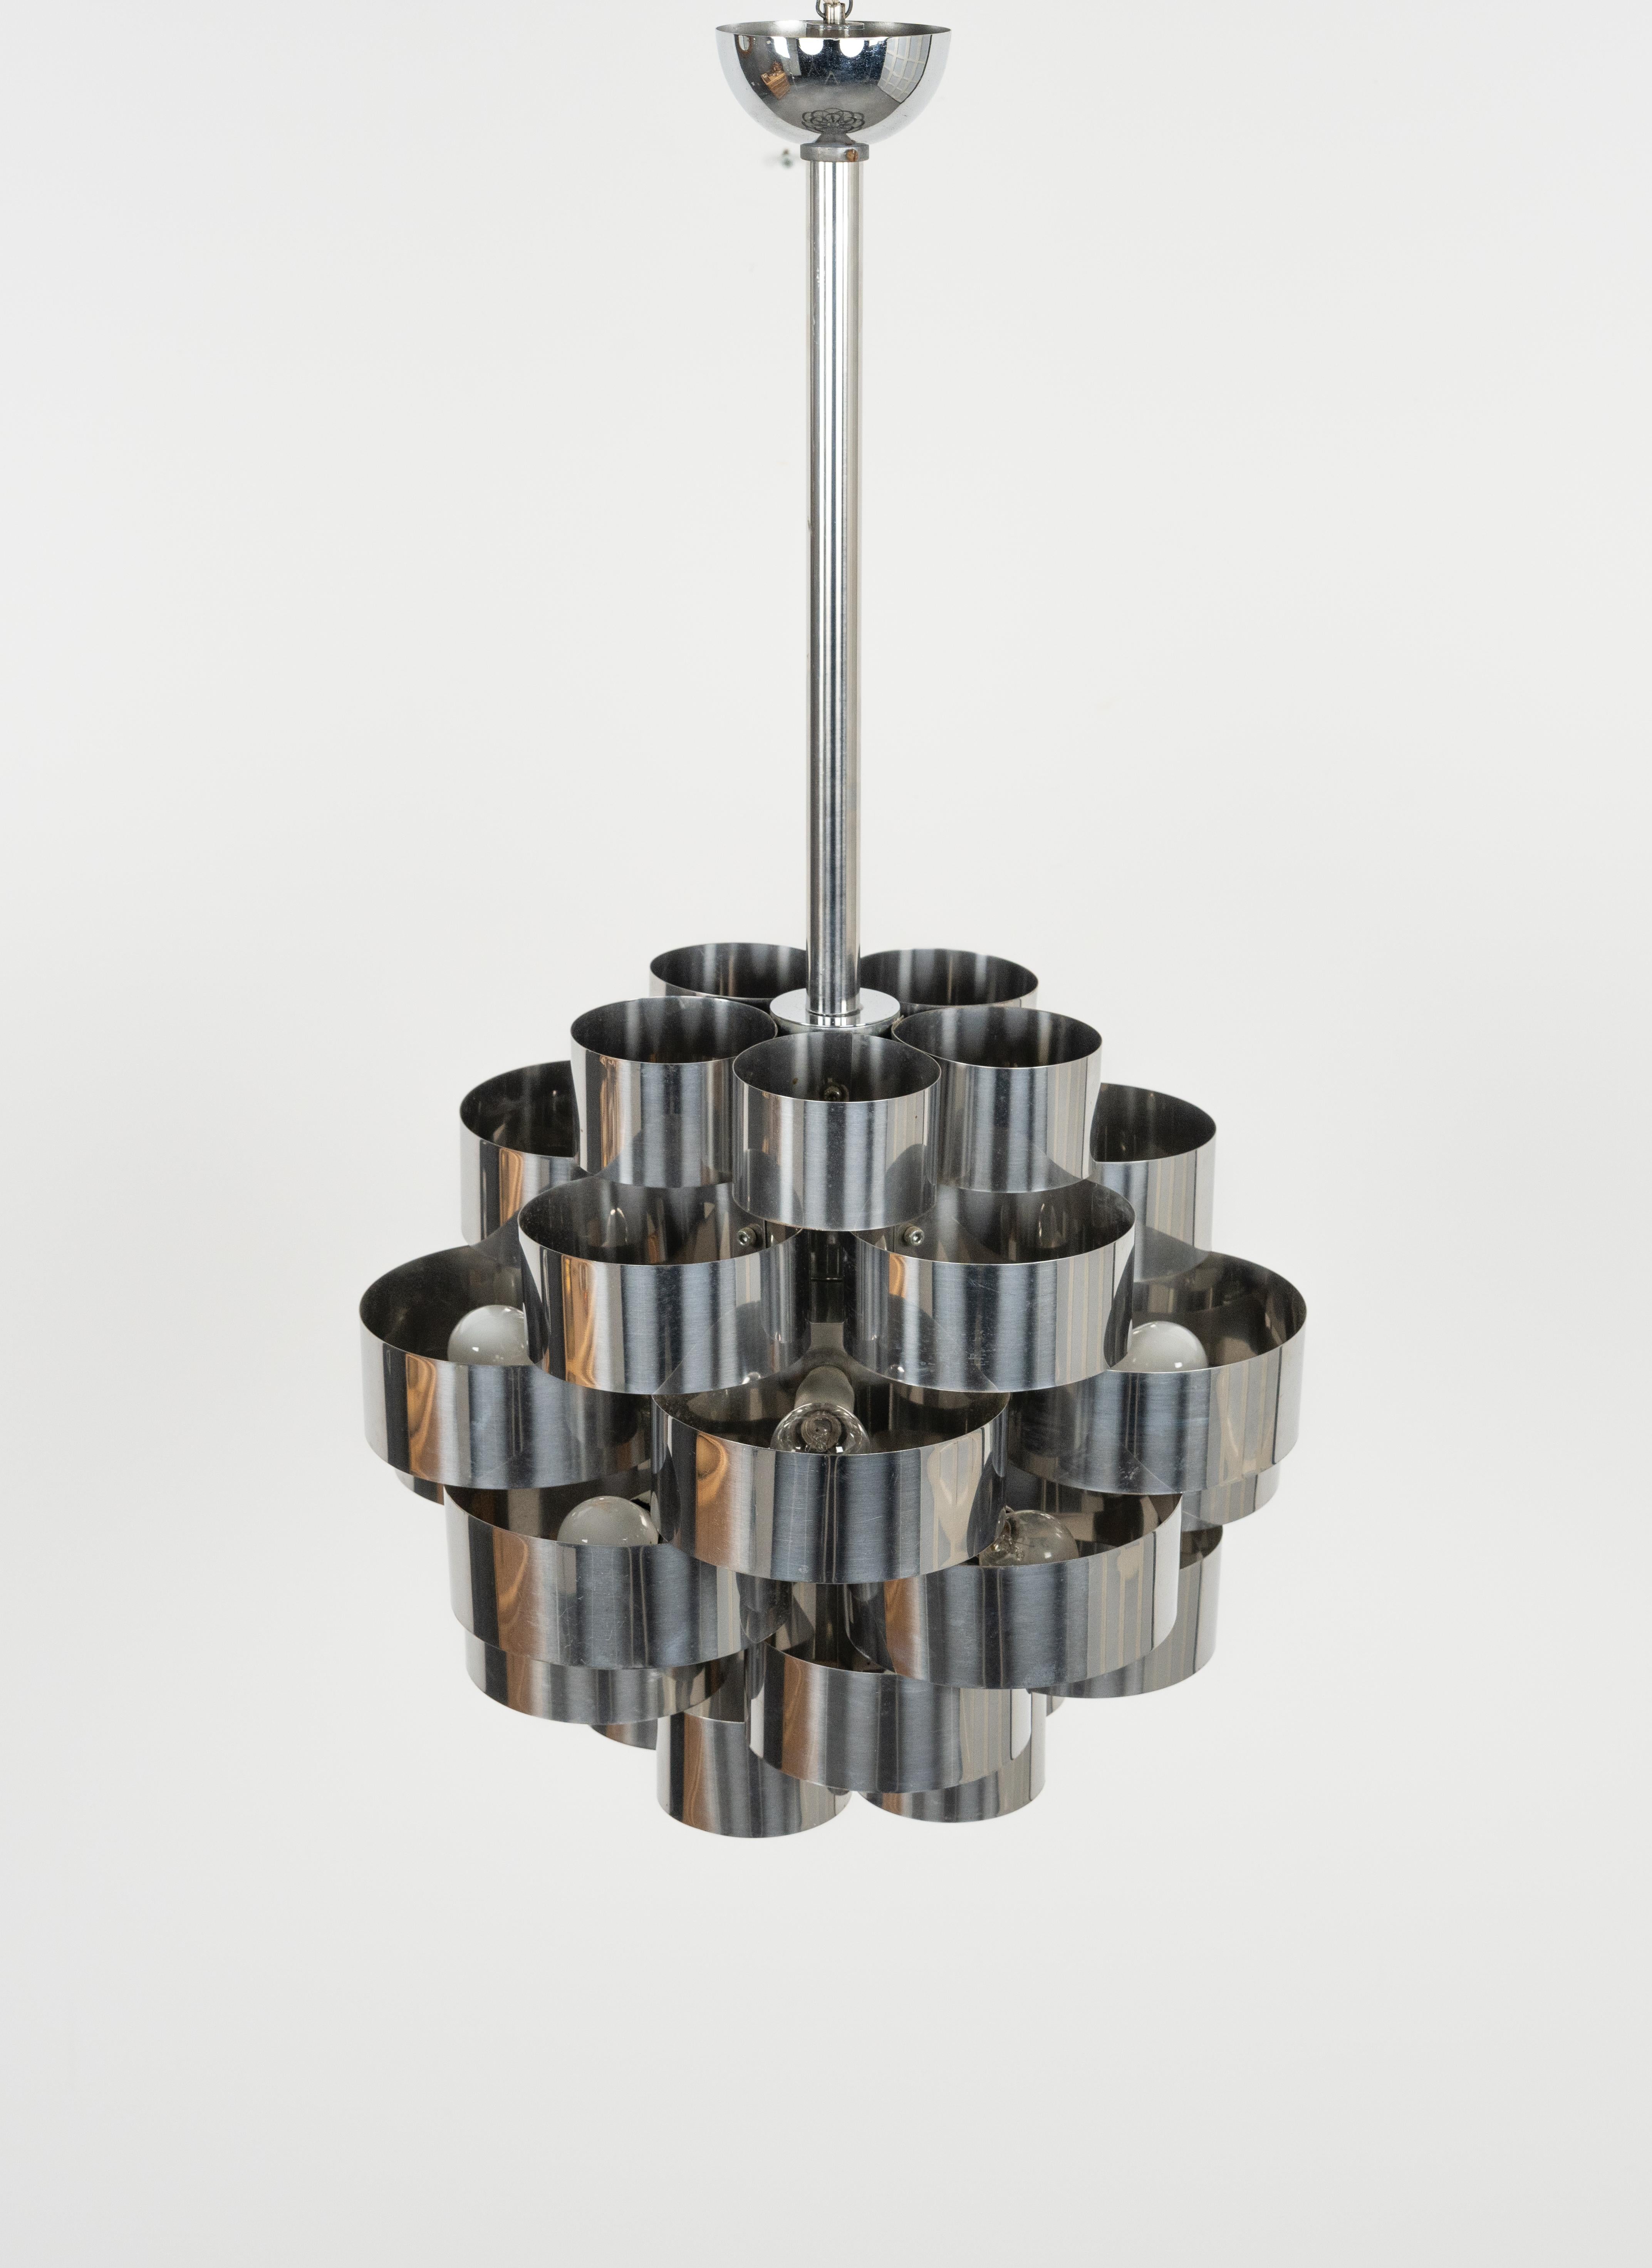 Metal Midcentury Chandelier Aluminum and Steel by Max Sauze for Sciolari, Italy 1970s For Sale